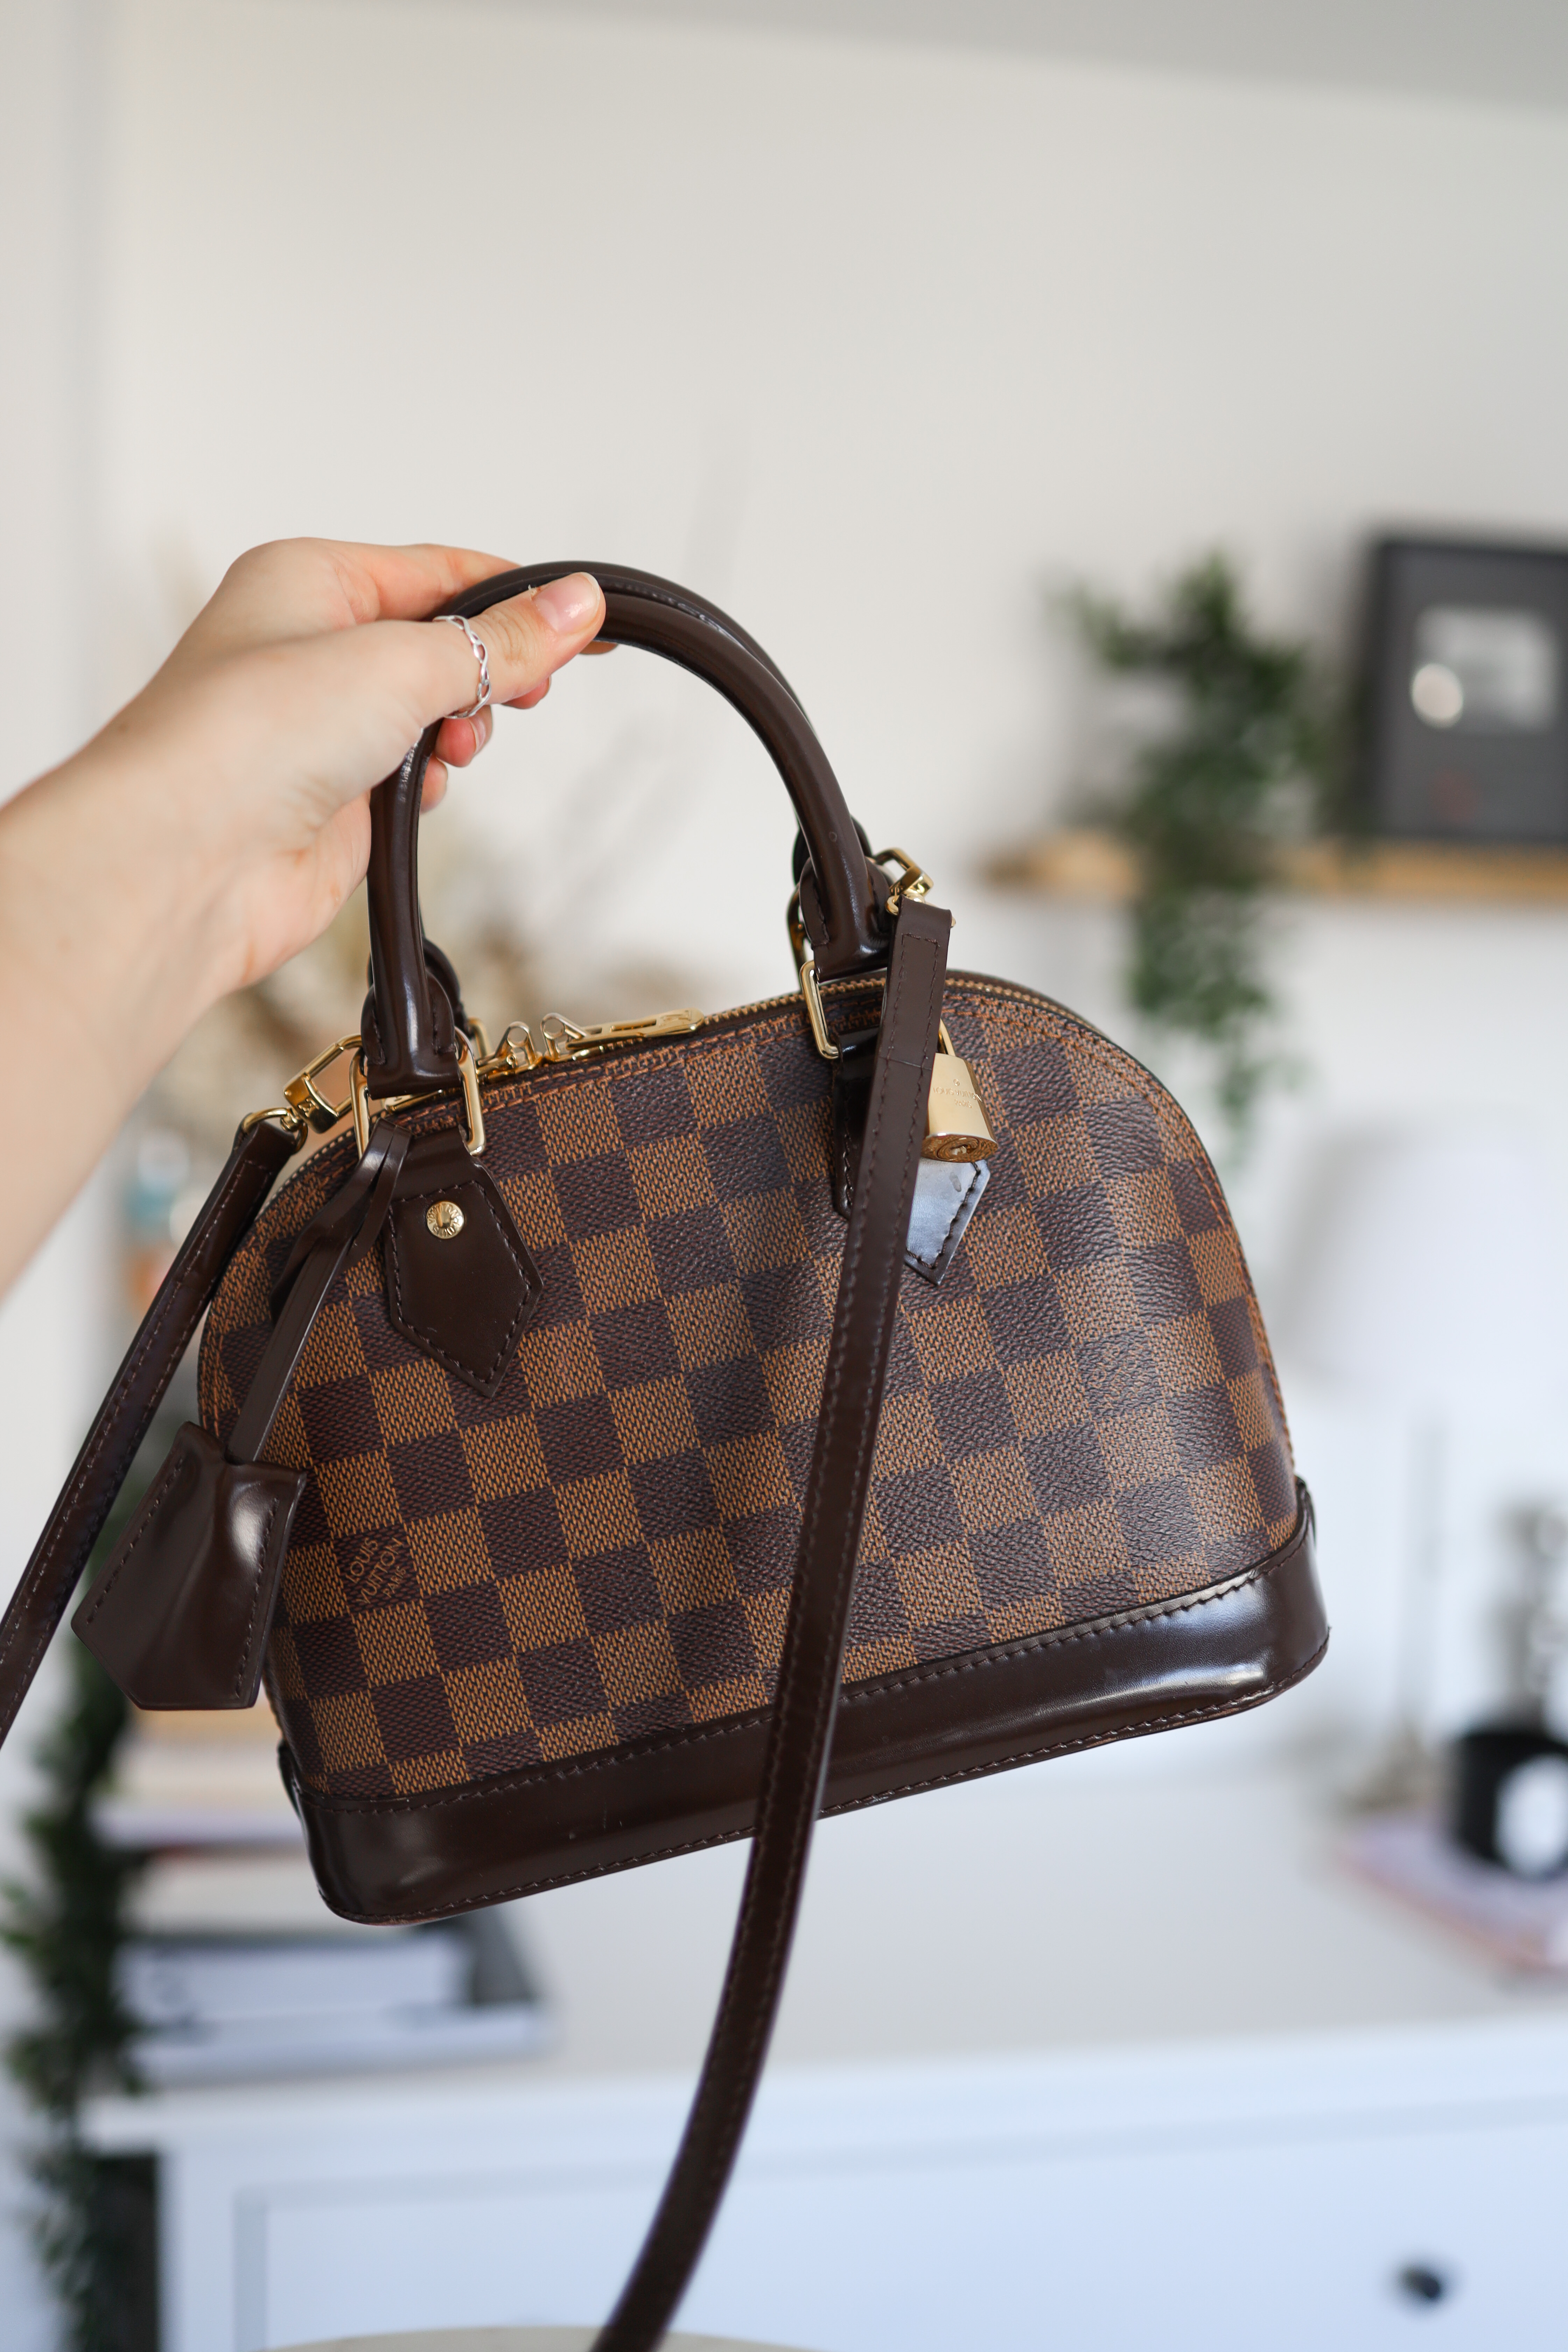 LOUIS VUITTON ALMA BB REVIEW + WHAT'S IN MY BAG